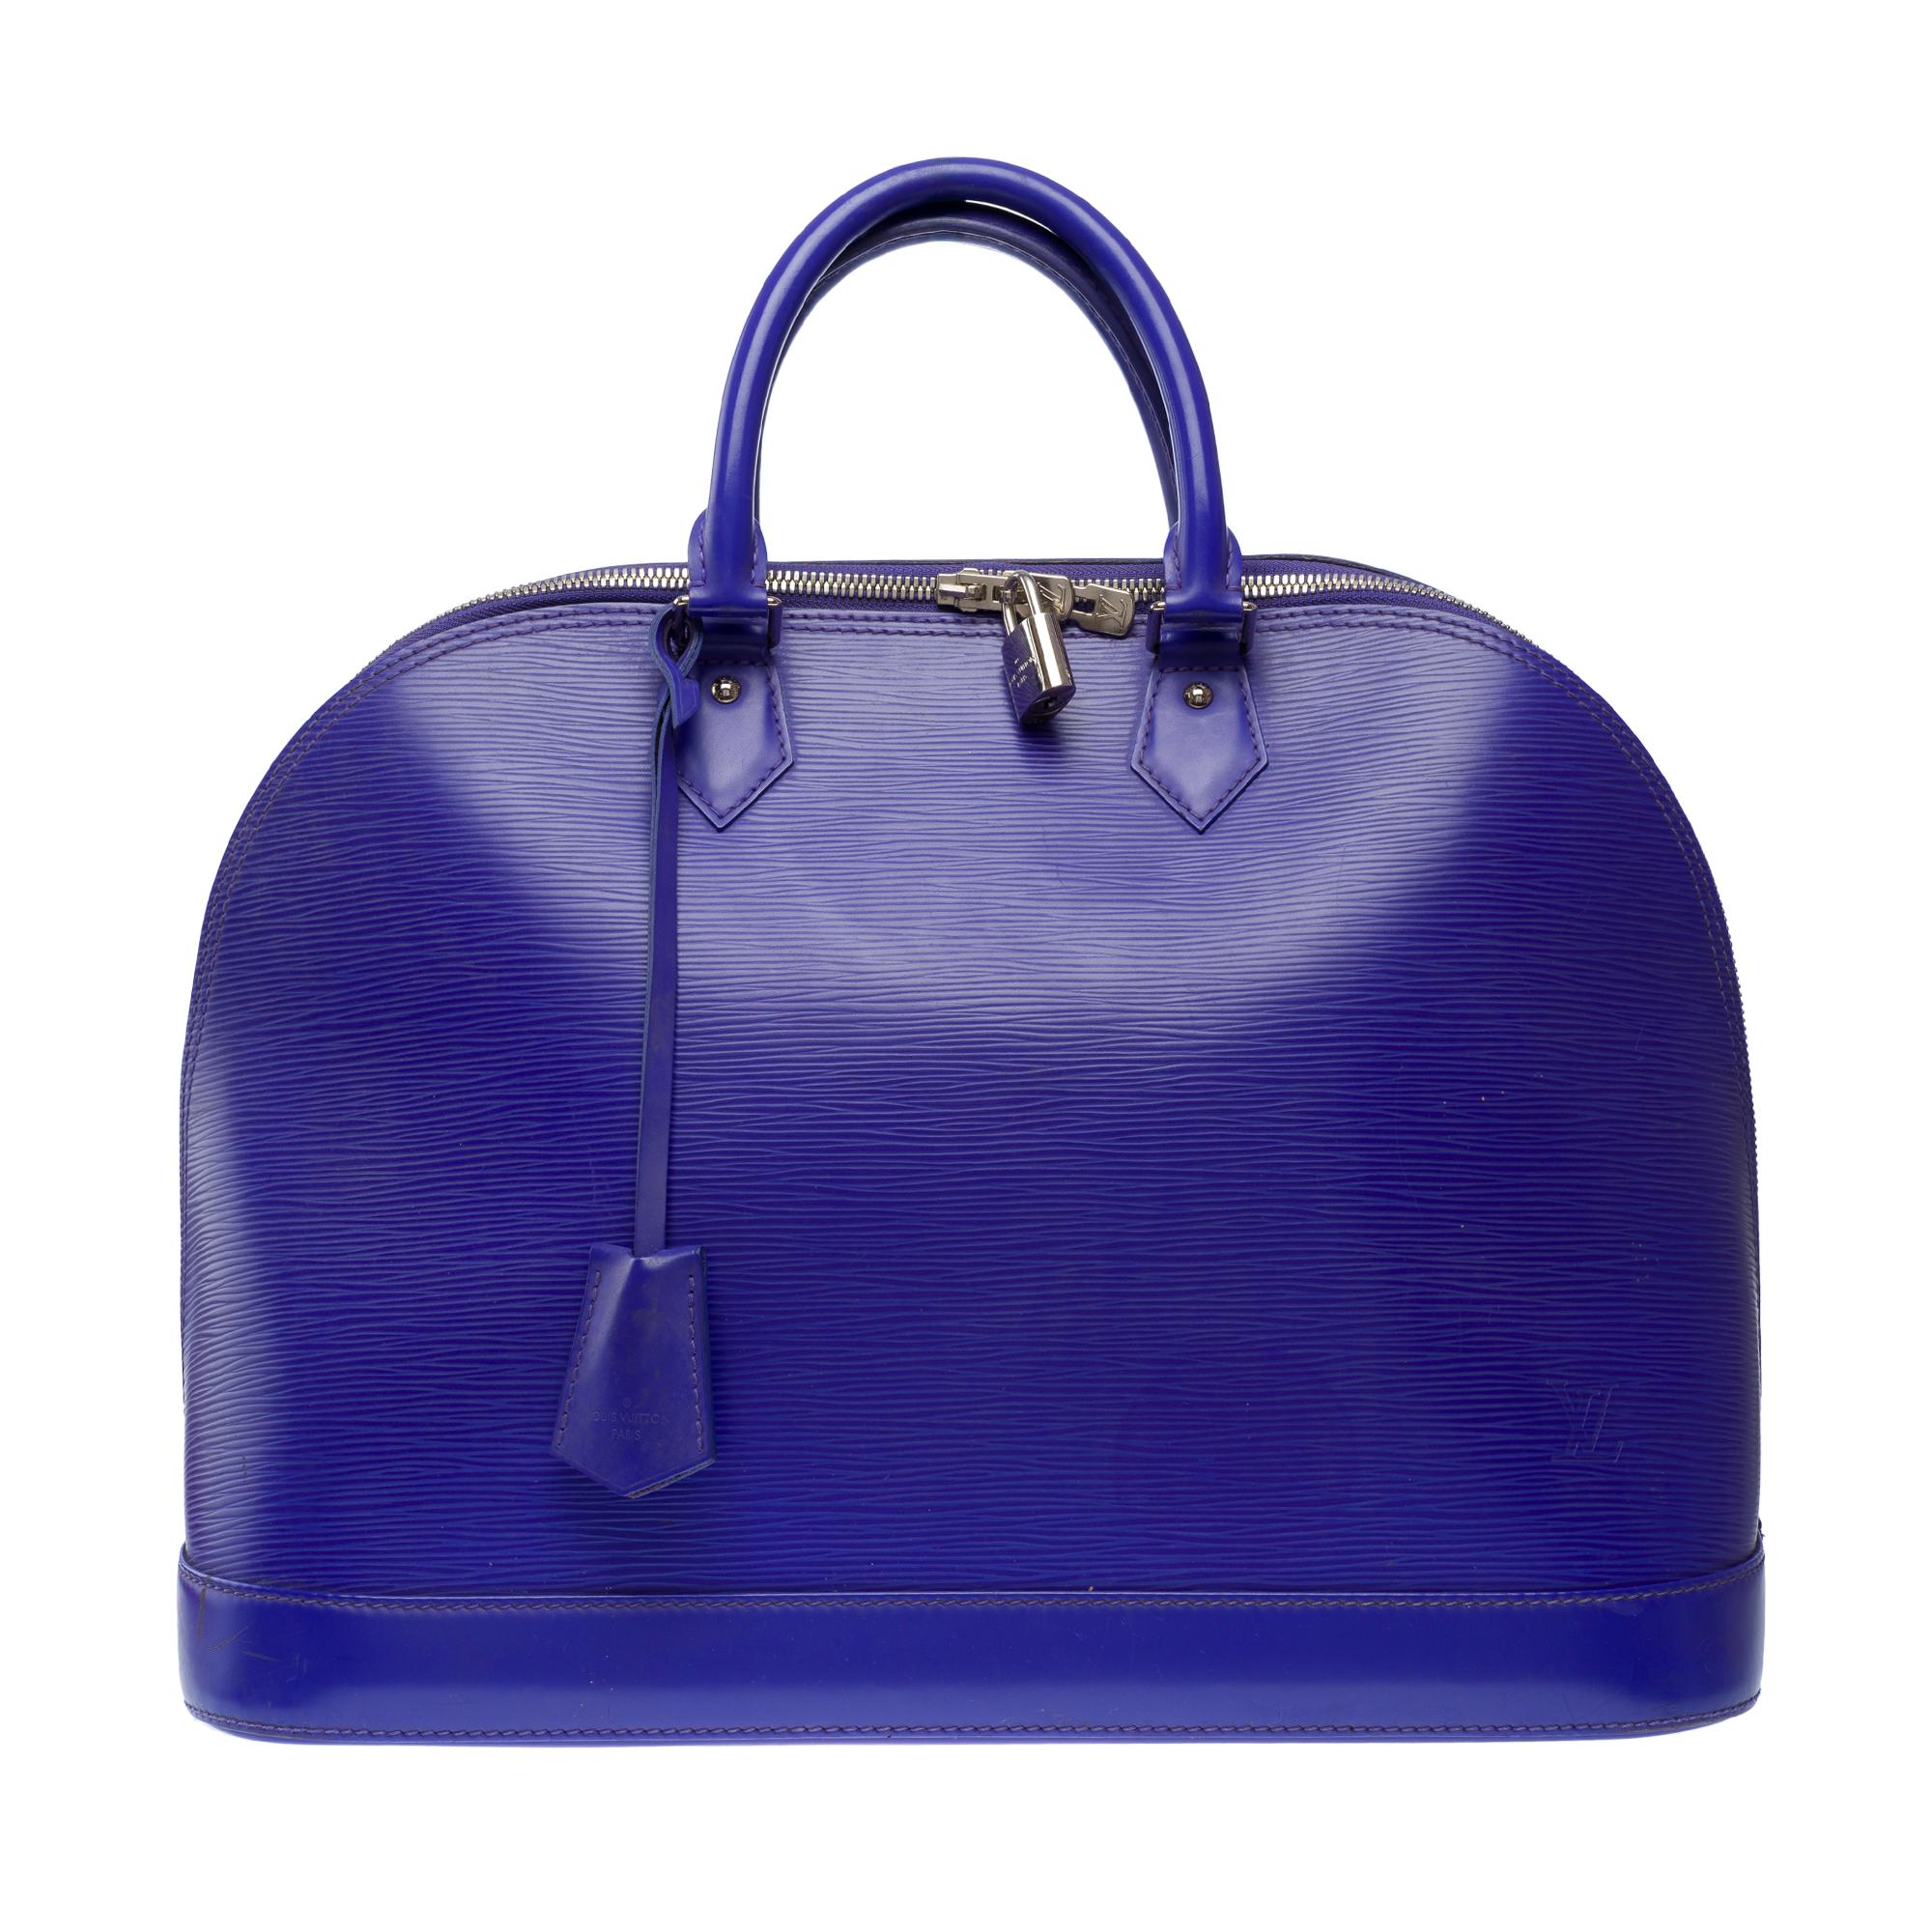 Very​ ​Chic​ ​Louis​ ​Vuitton​ ​Alma​ ​GM​ ​handbag​ ​in​ ​Fig​ ​epi​ ​leather​ ​,​ ​silver​ ​metal​ ​trim,​ ​double​ ​handle​ ​in​ ​purple​ ​leather​ ​for​ ​hand​ ​carry

Double​ ​zip
Inner​ ​lining​ ​in​ ​purple​ ​suede,​ ​a​ ​double​ ​patch​